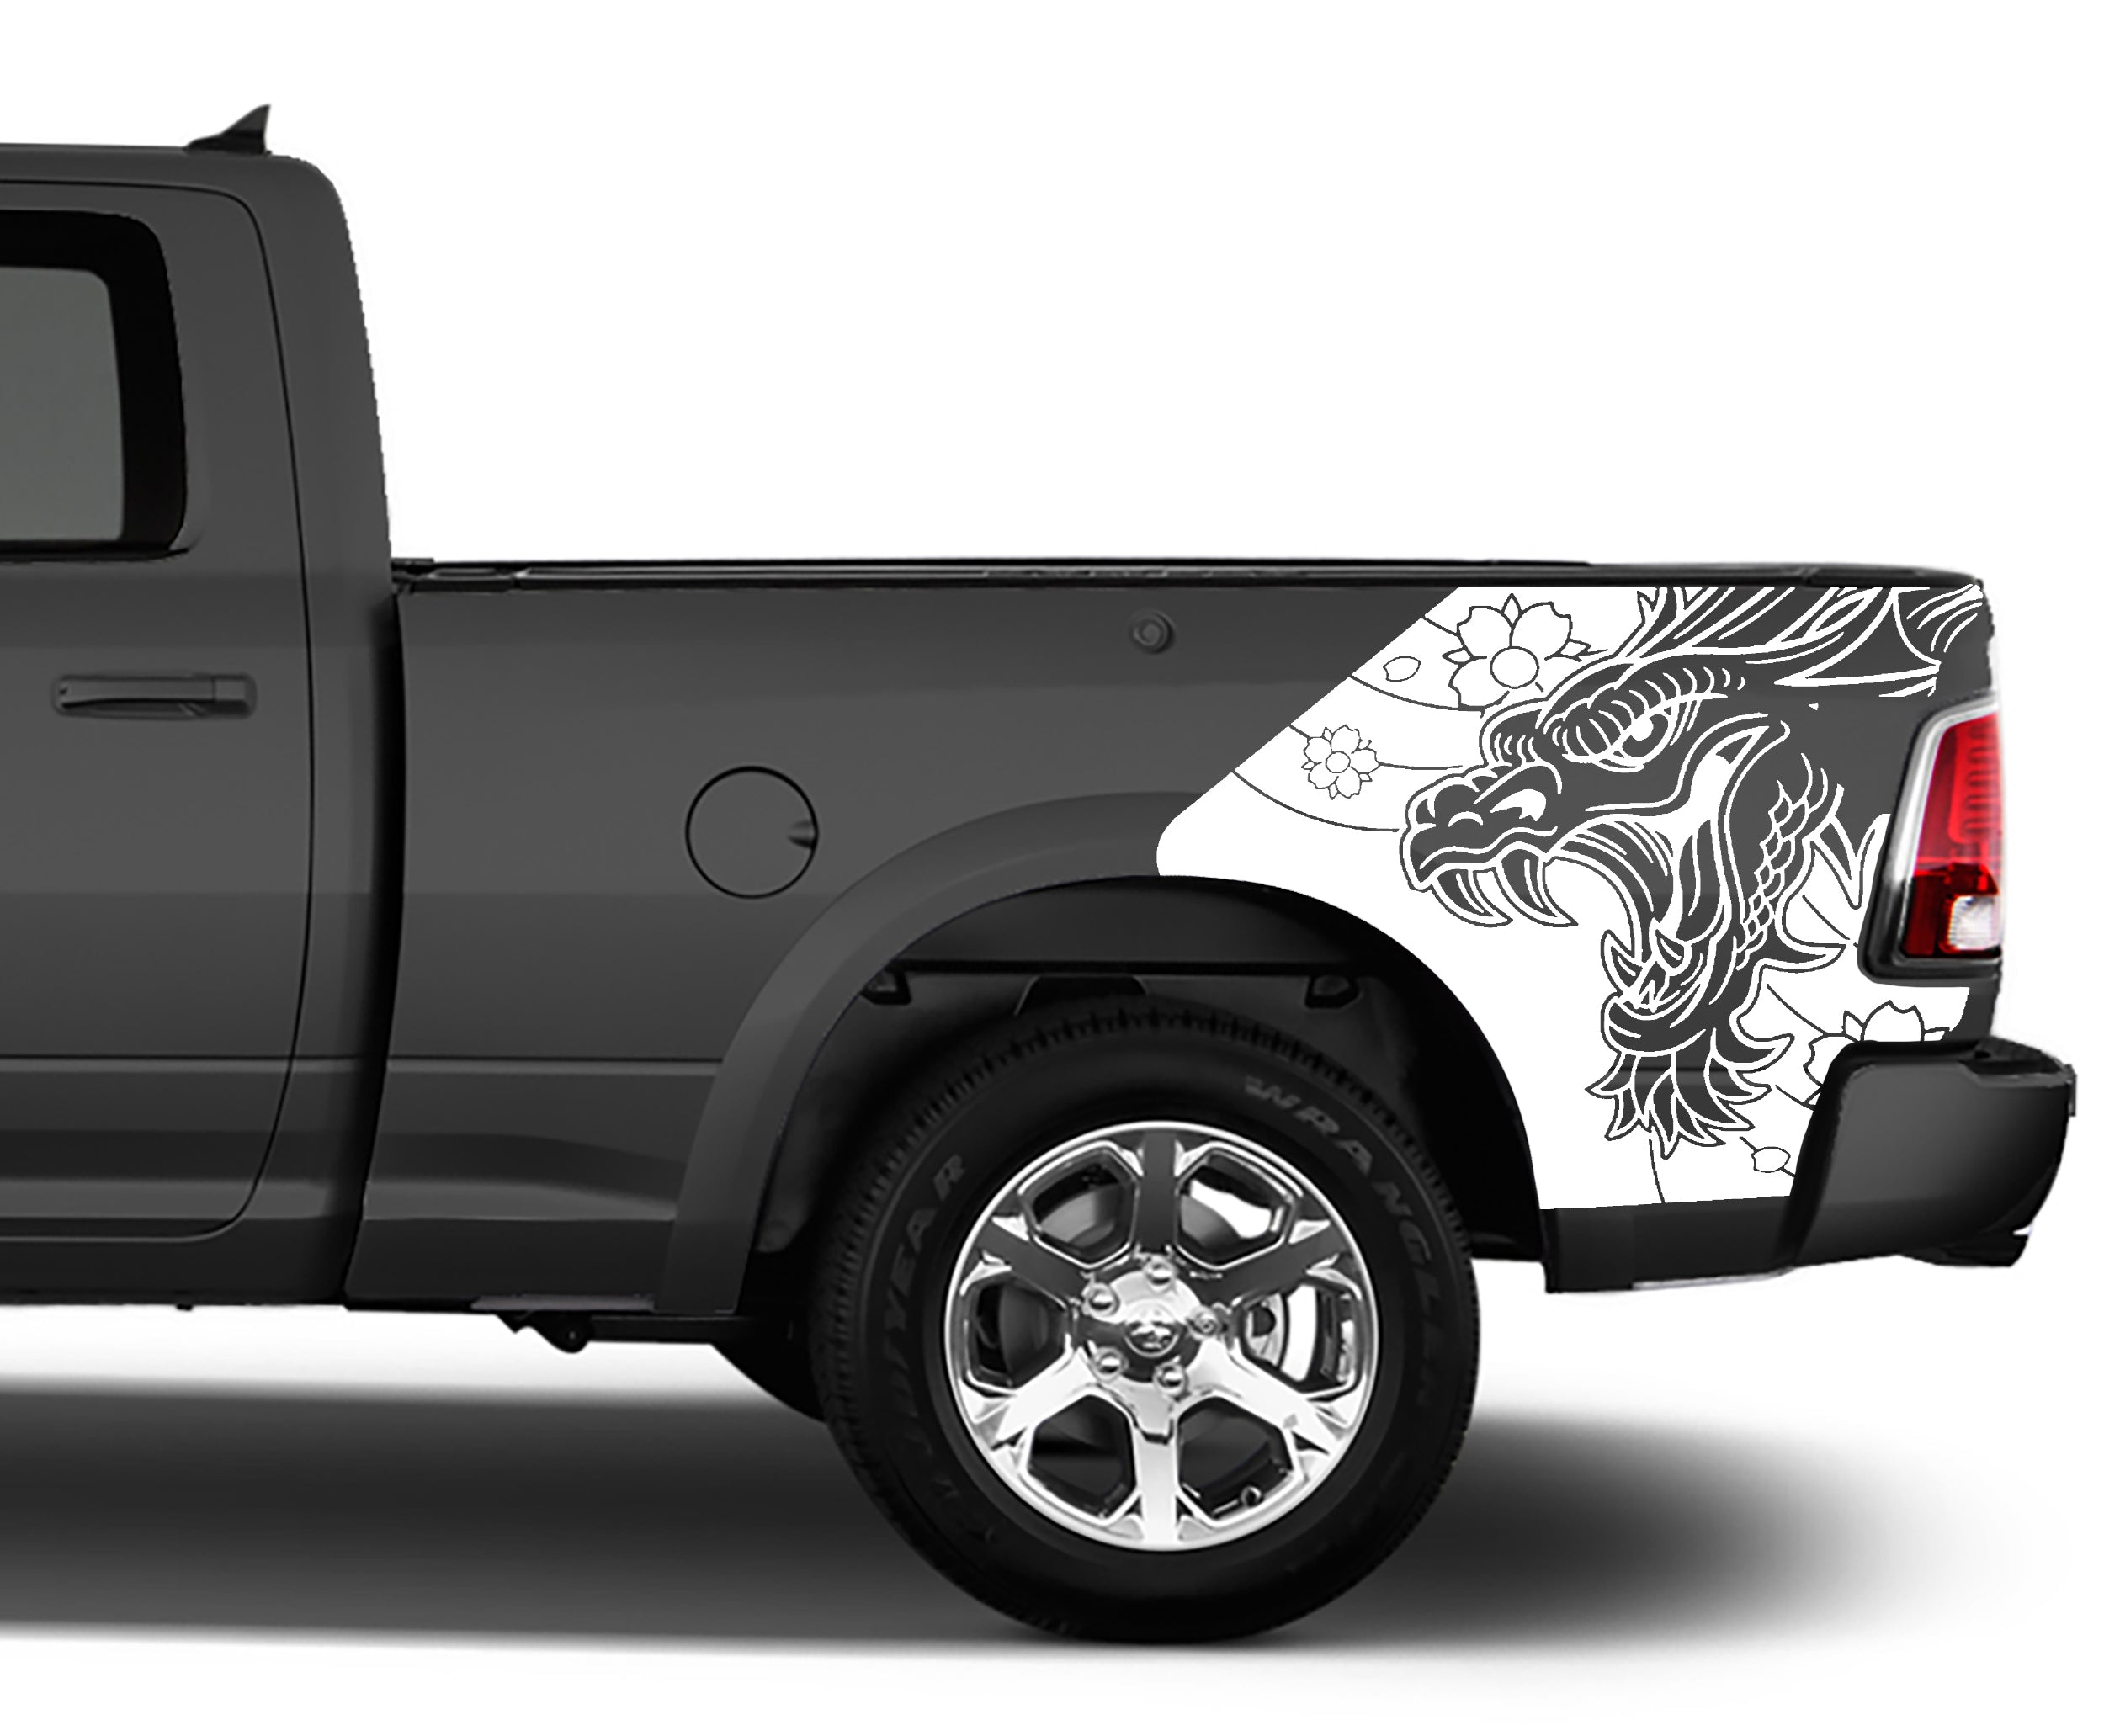 dragon bed graphics for dodge ram 2008 to 2018 models white